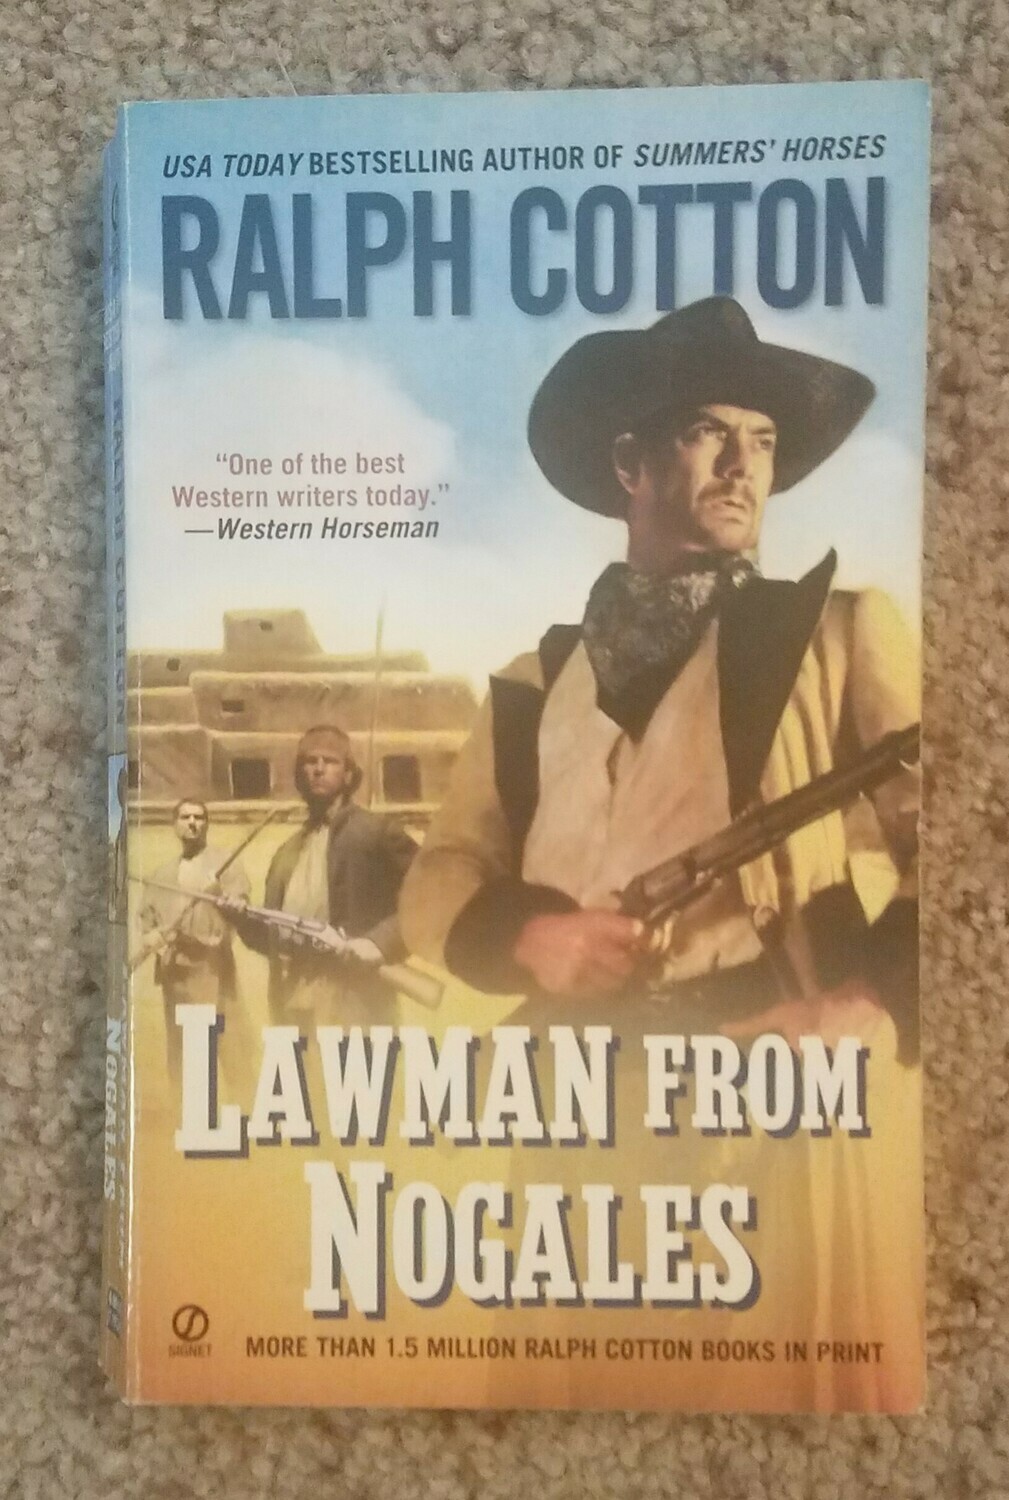 Lawman from Nogales by Ralph Cotton